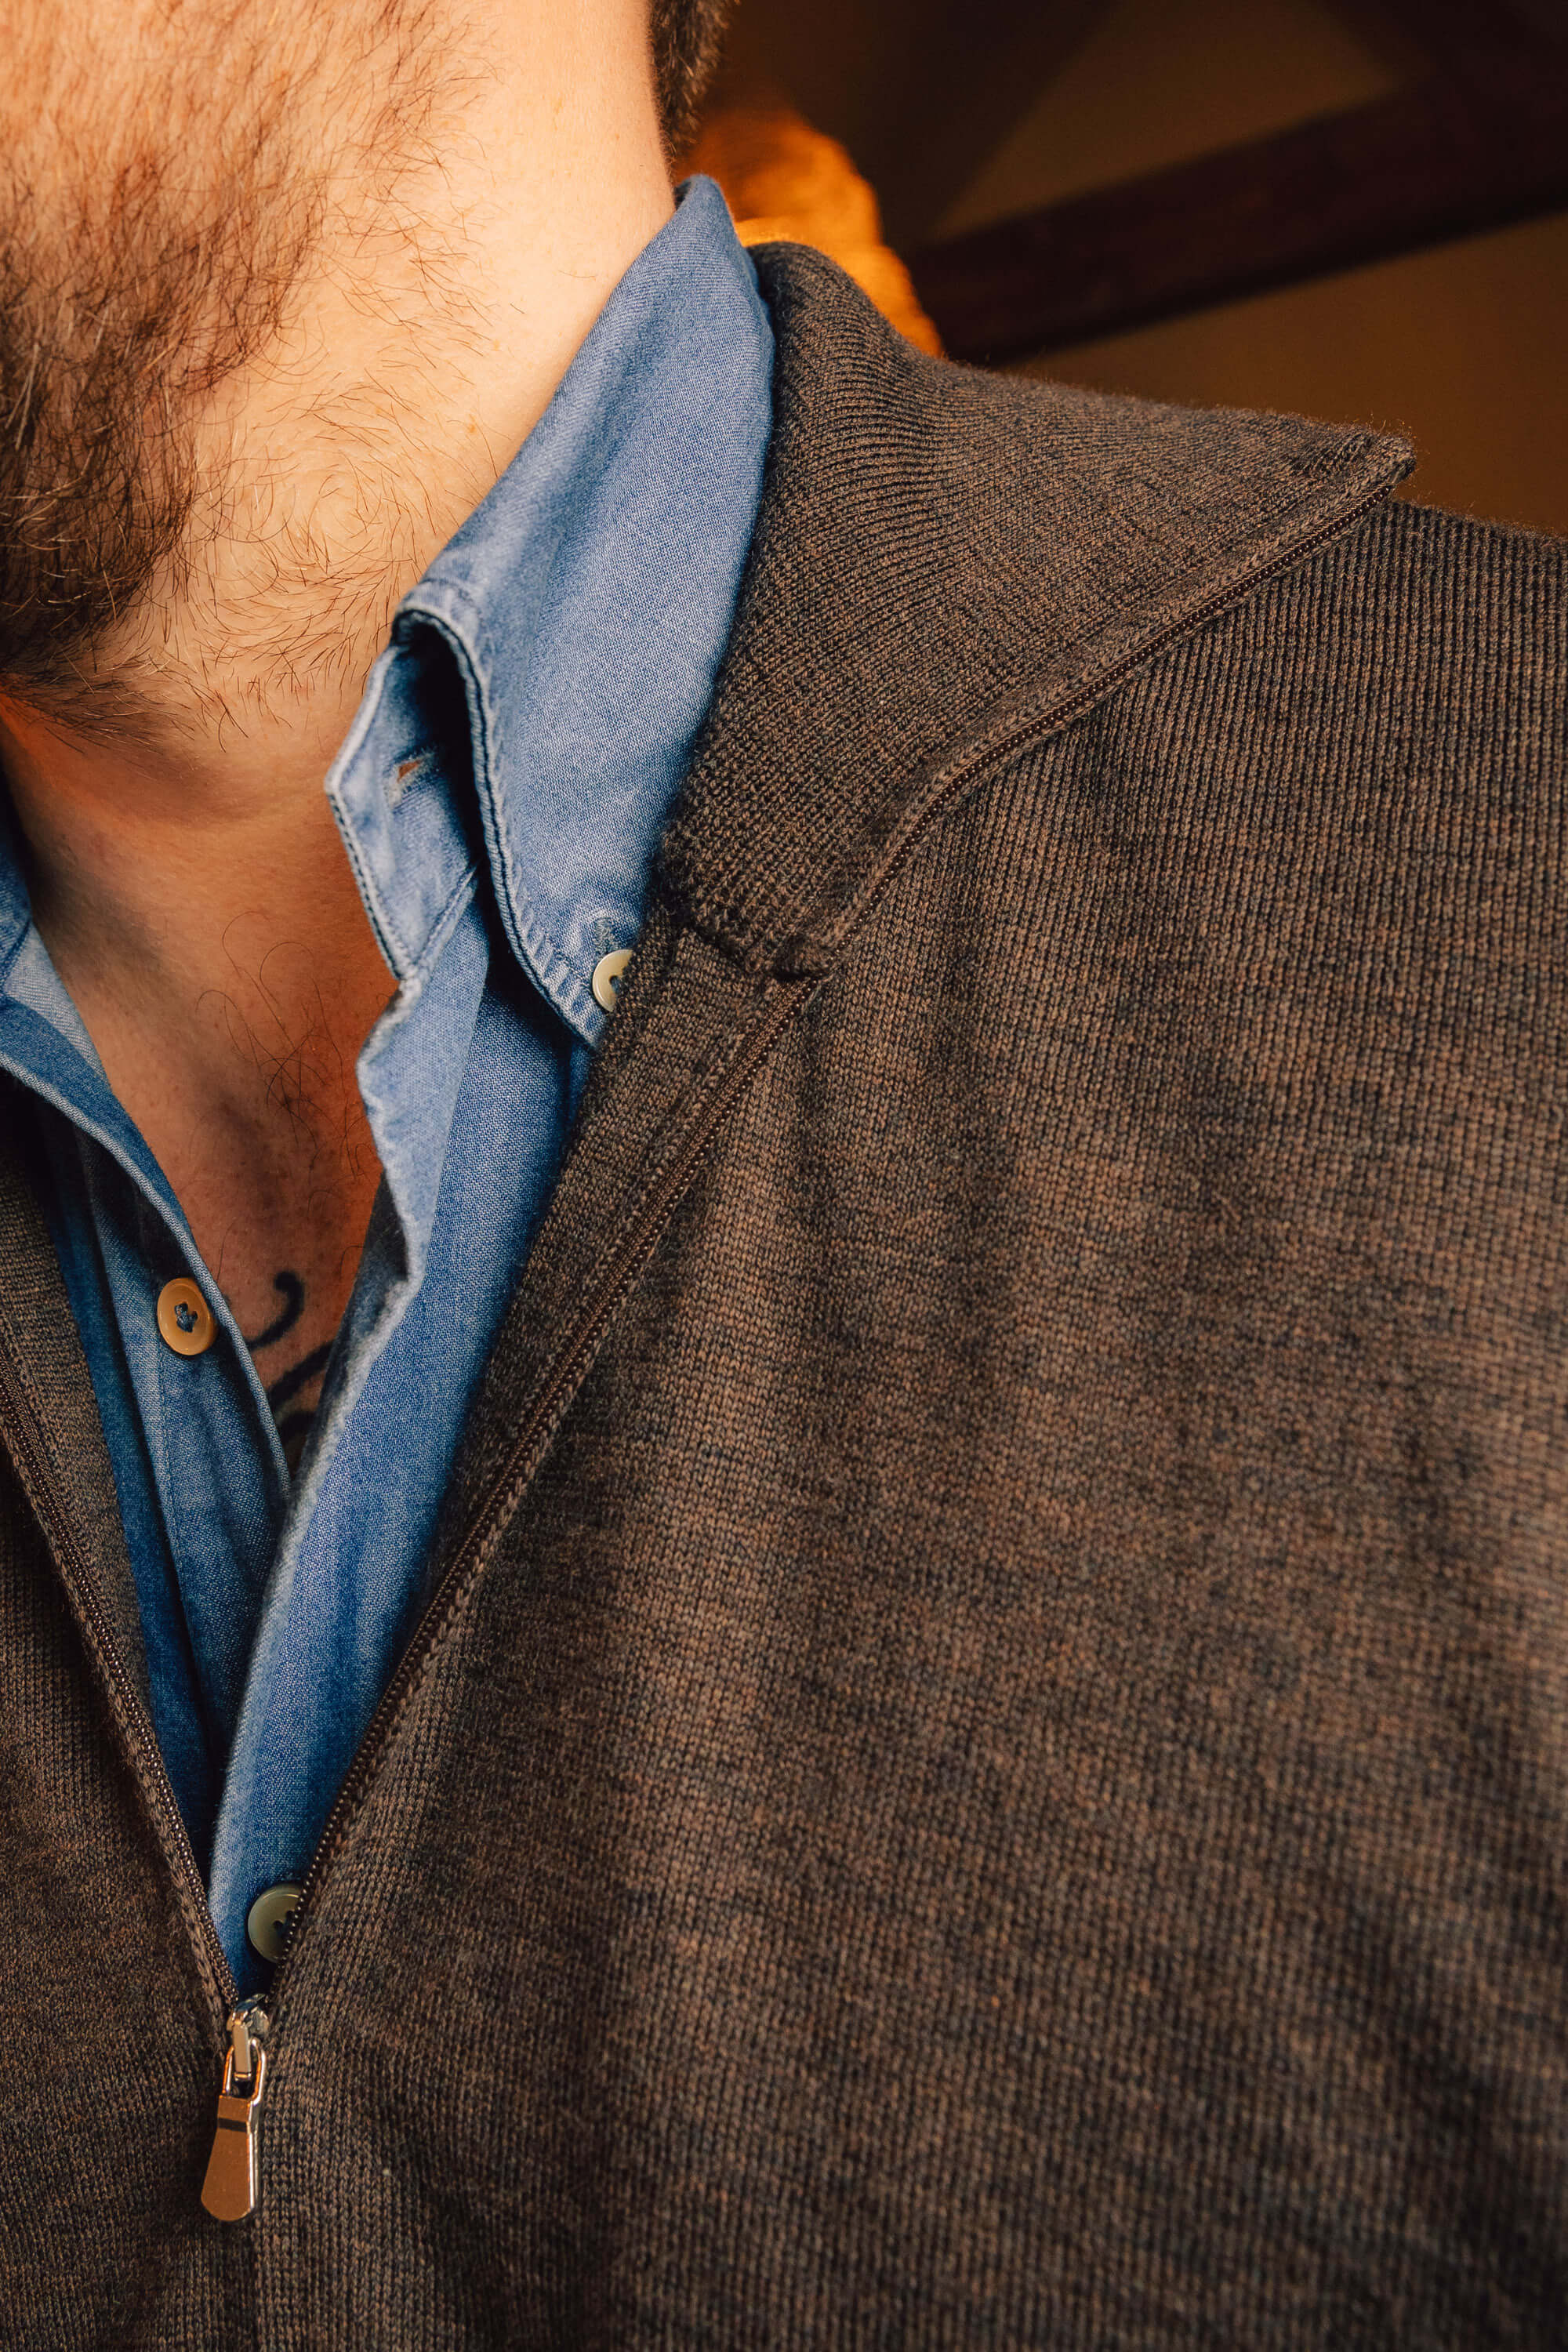 Alessandro Gherardi Shirts: Experience, Passion and Craftsmanship